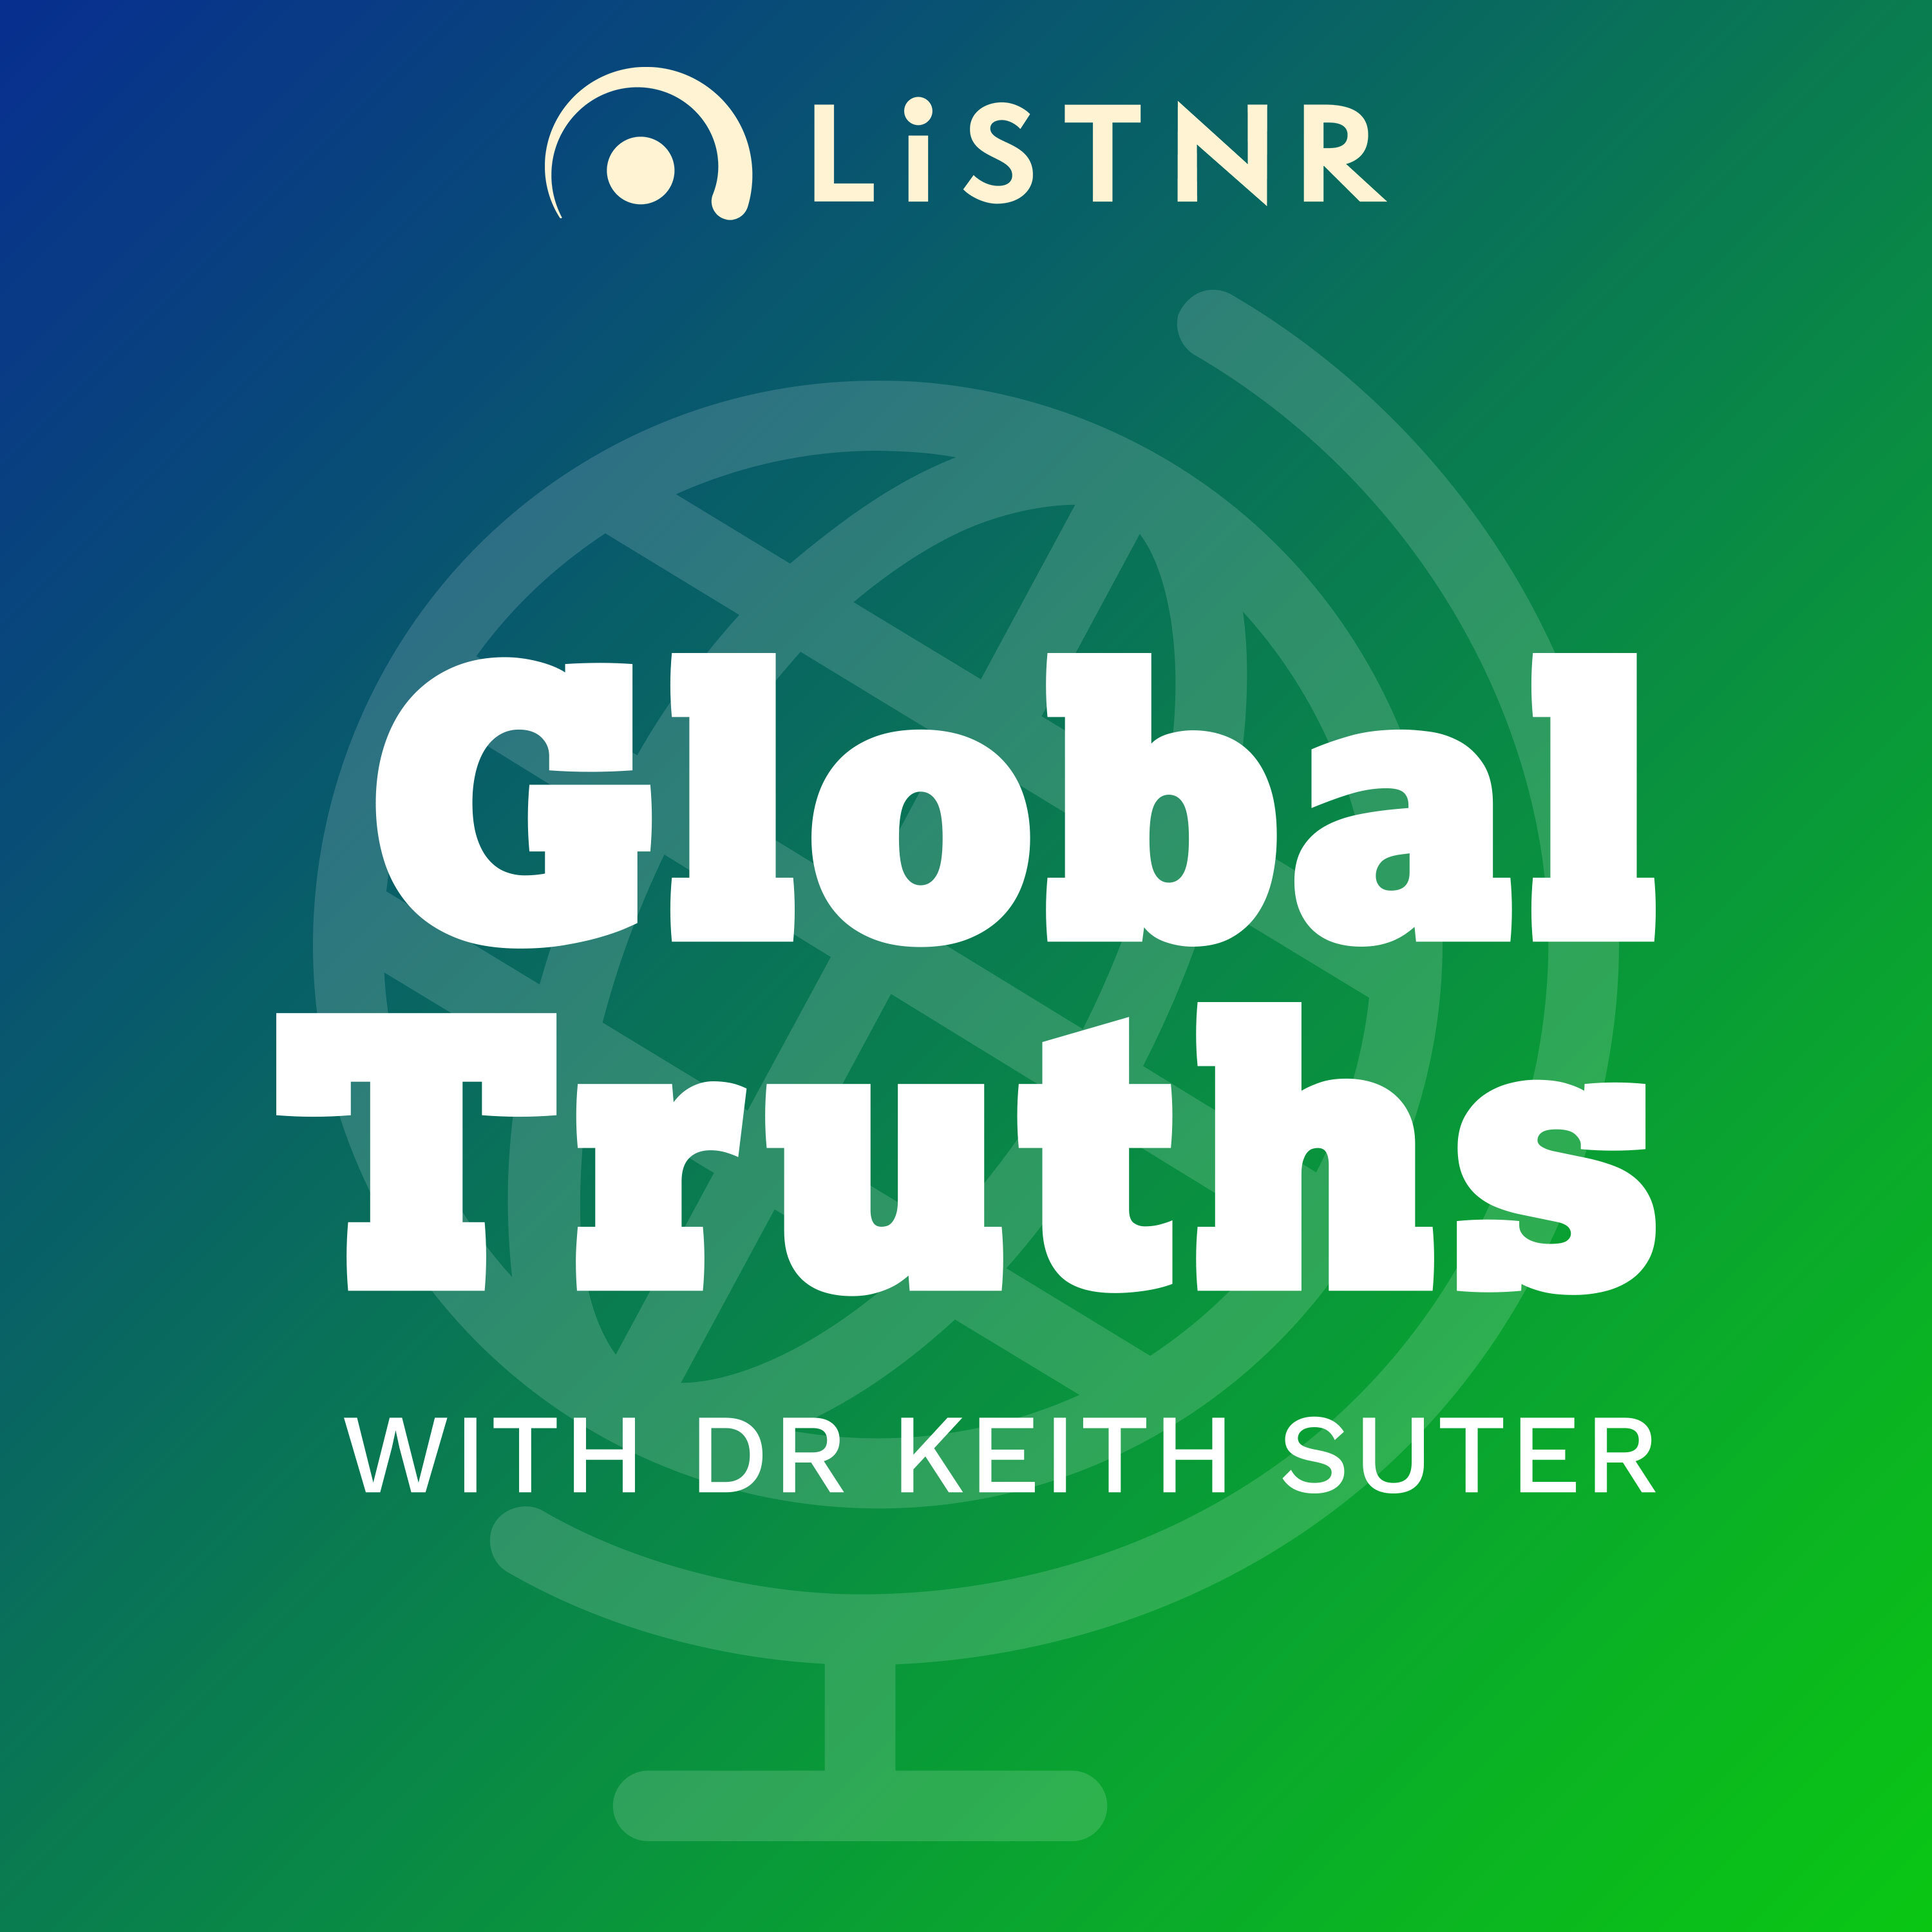 Global Truths with Dr Keith Suter